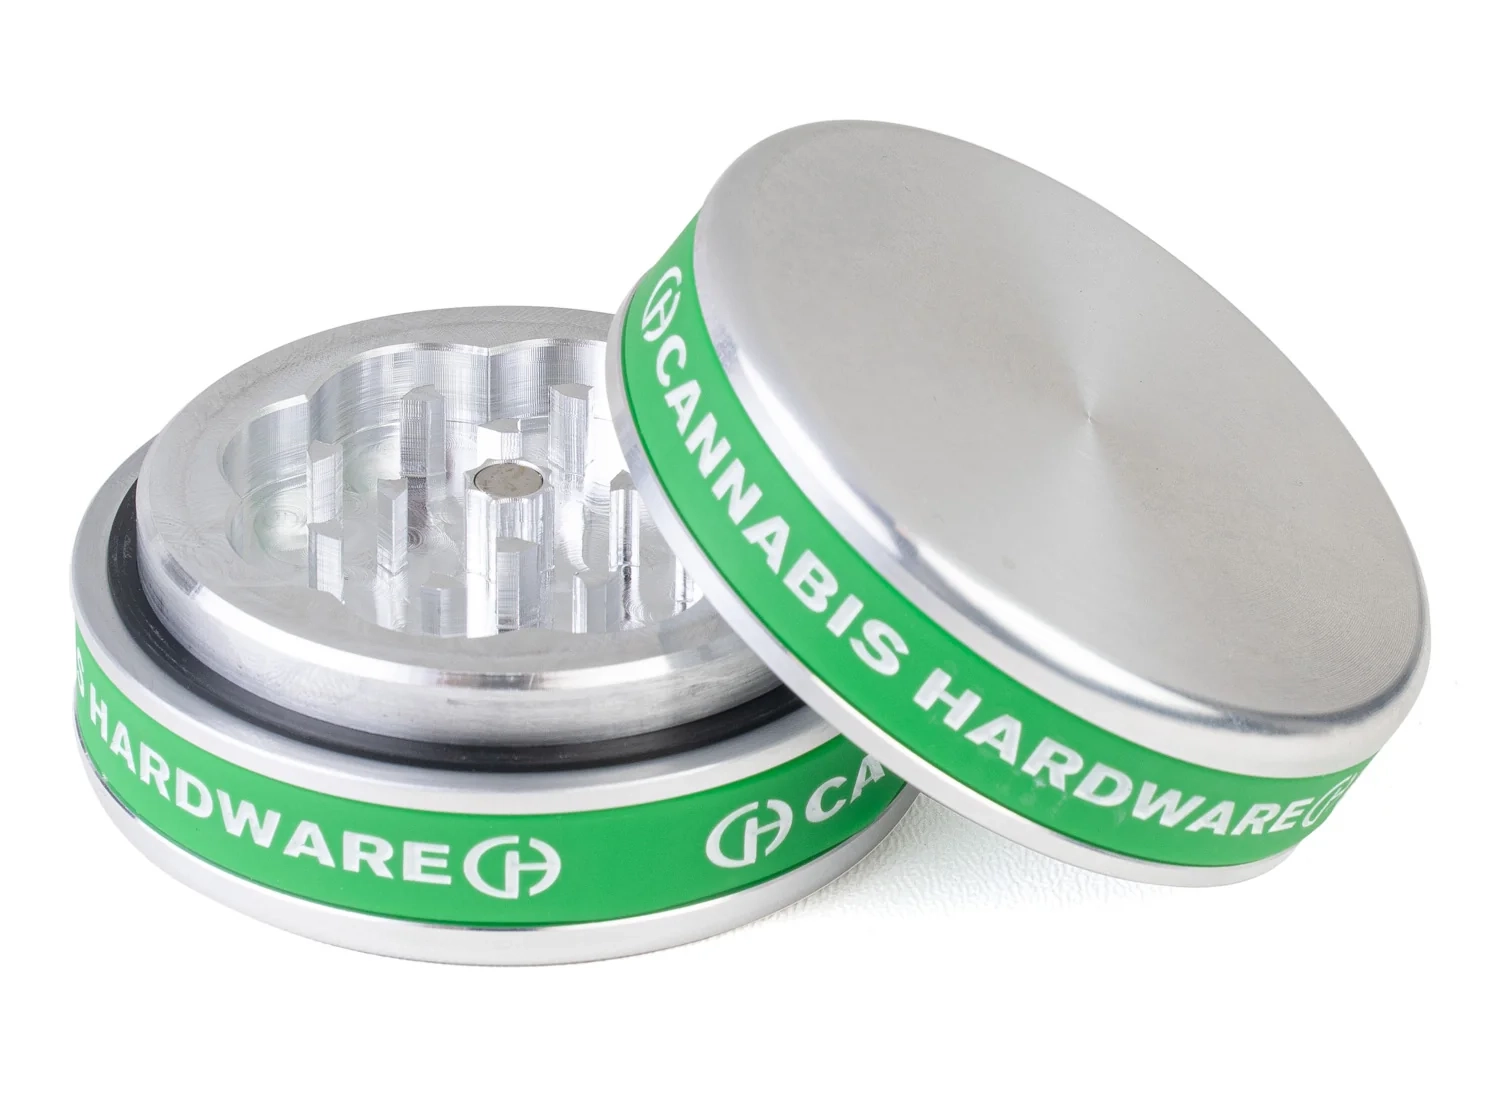 Metal Herb Grinder Buying Guide: How to Pick an Ideal One?